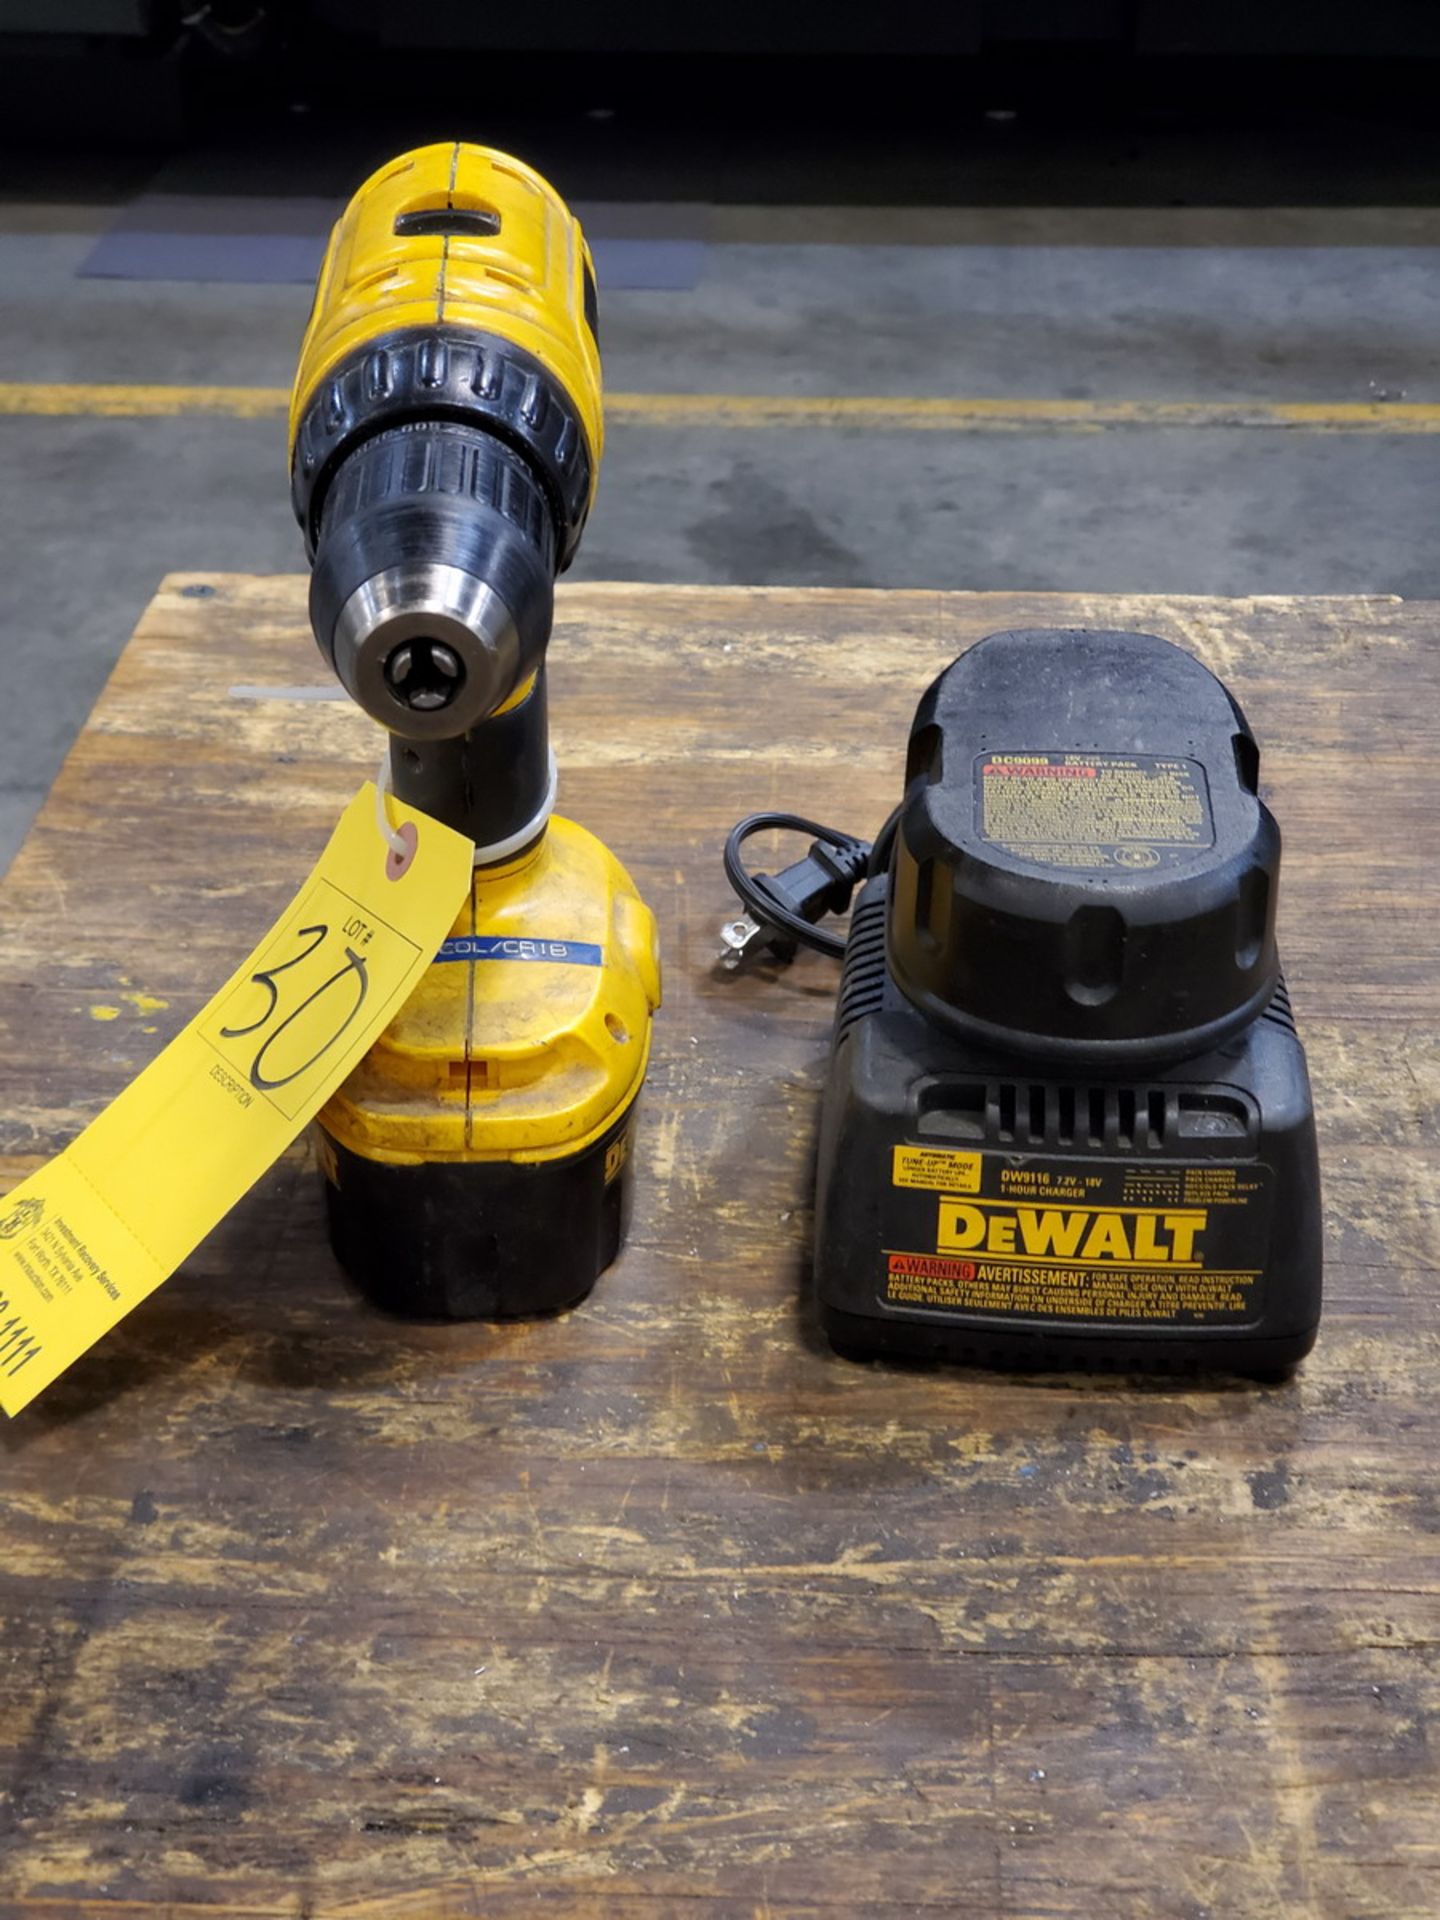 Dewalt DC970 1/2" Cordless Drill 18V, W/ Charger & Spare Battery